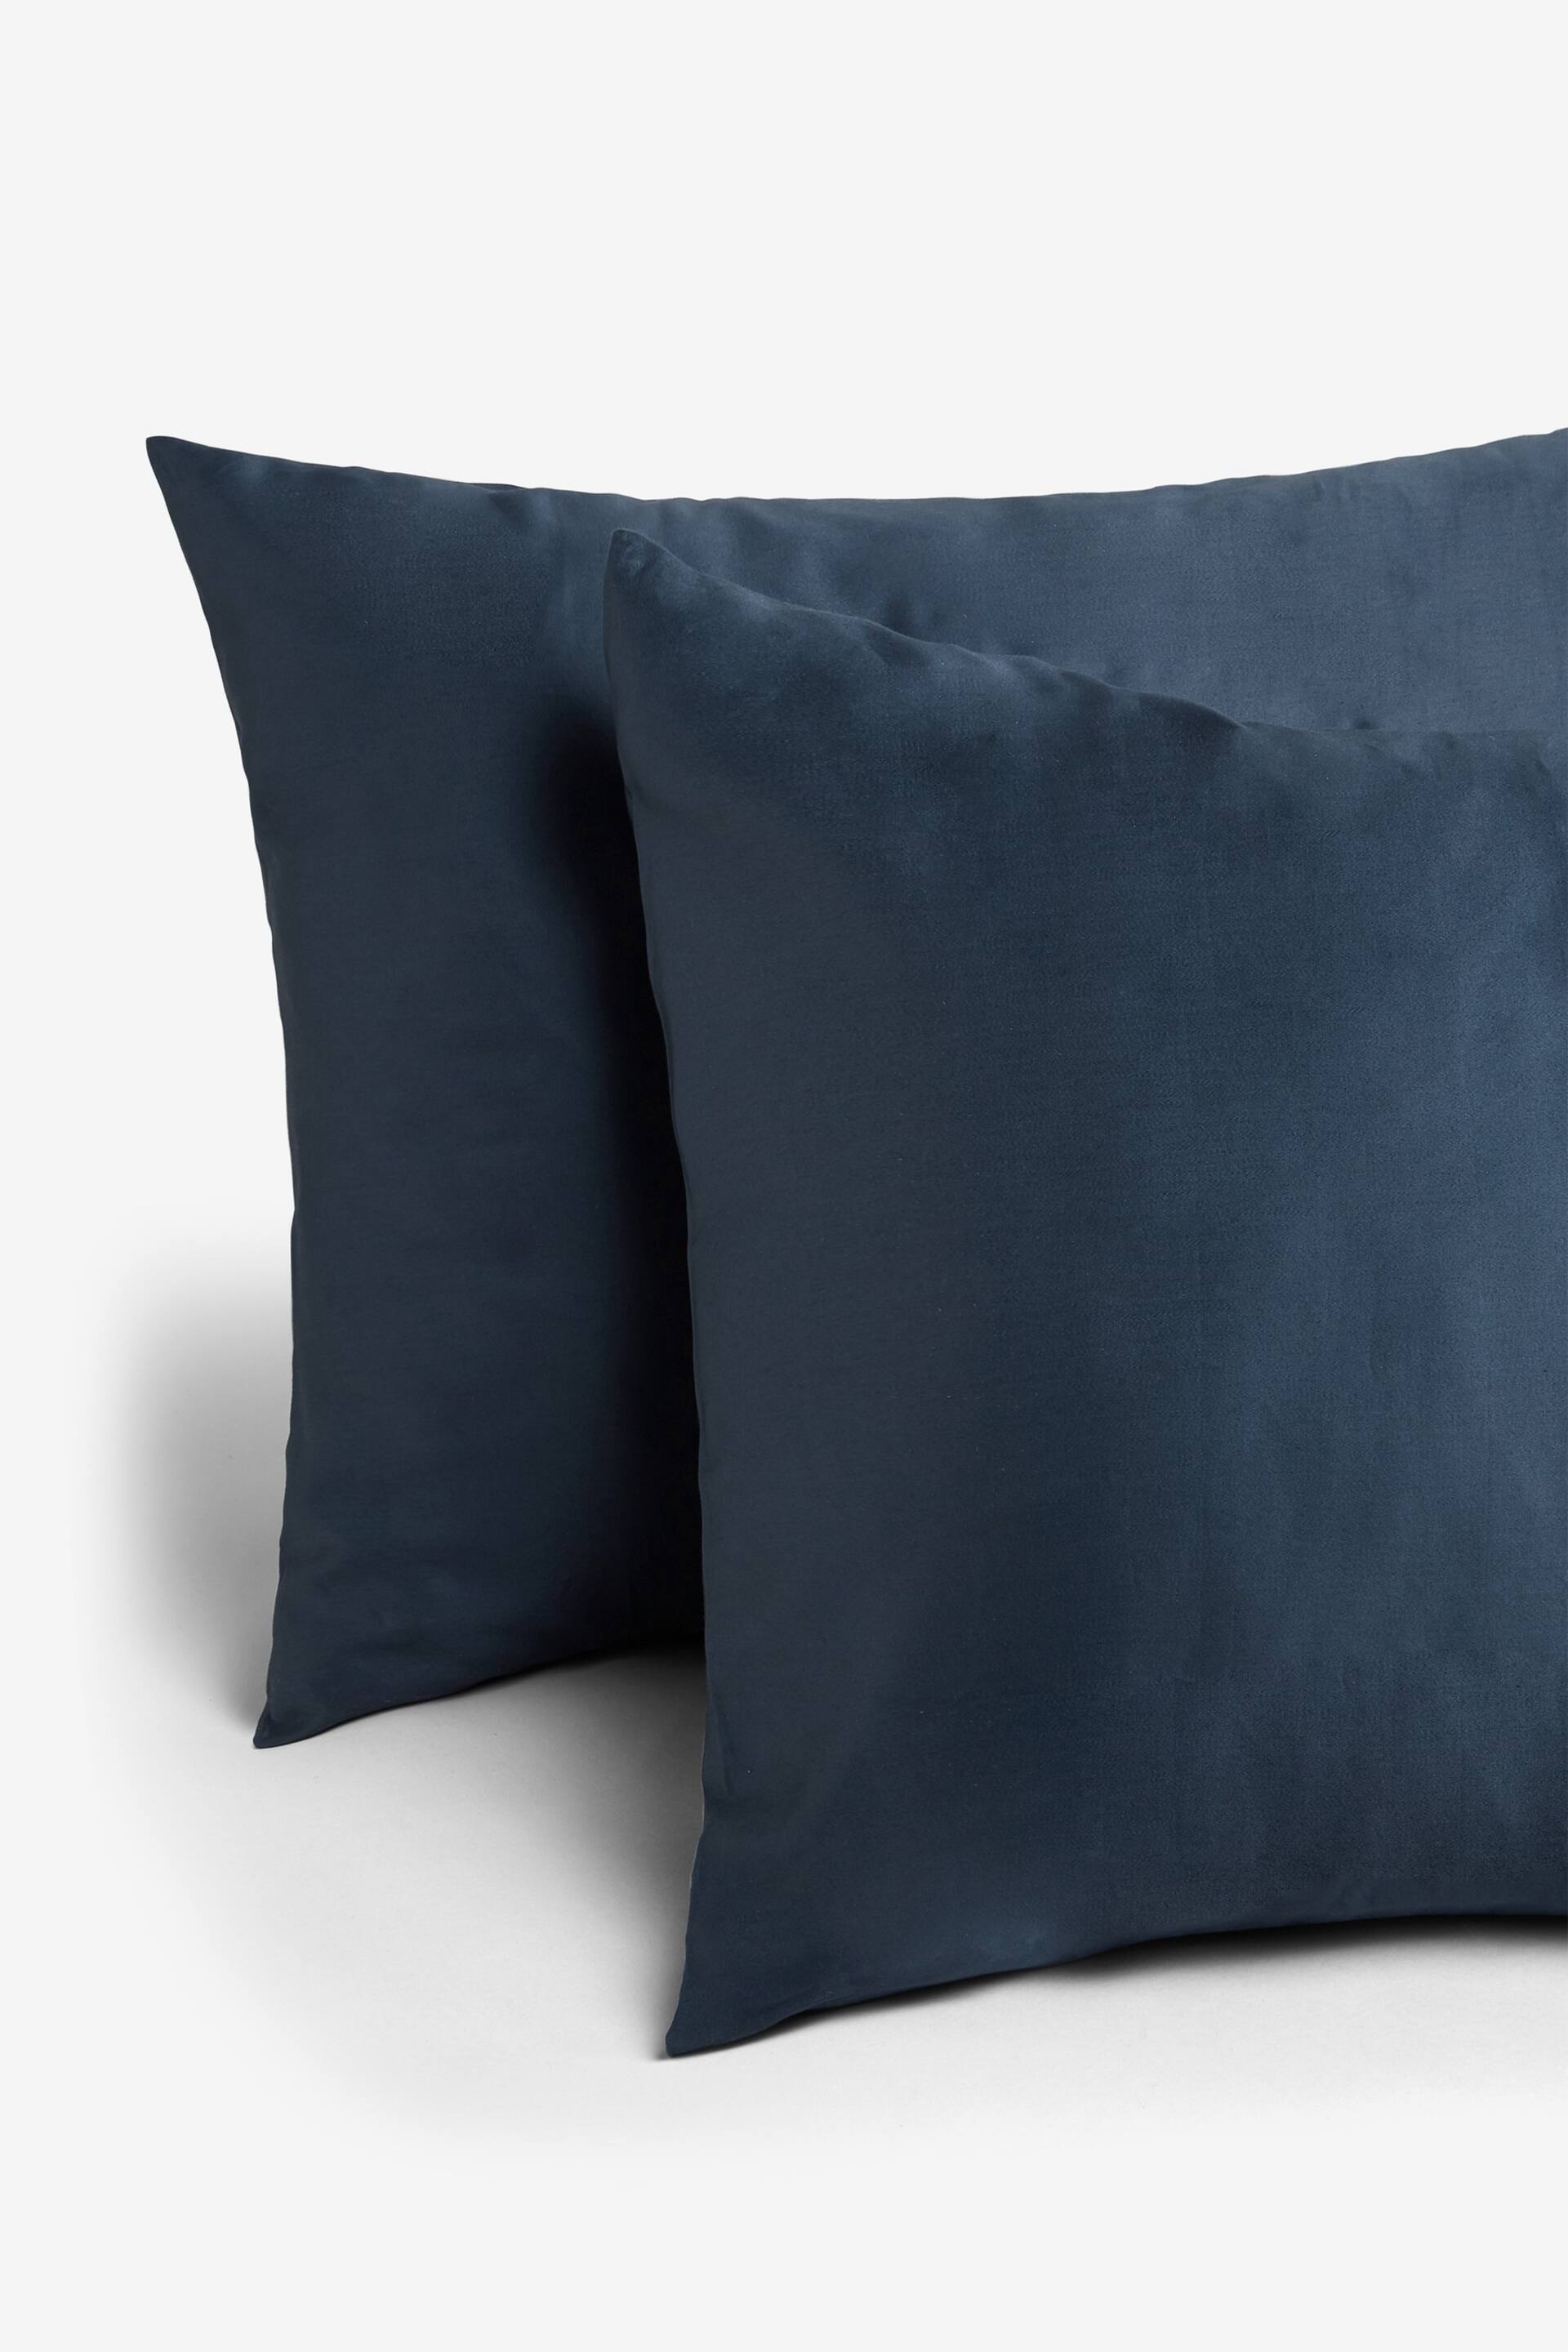 Set of 2 Navy Collection Luxe 400 Thread Count 100% Egyptian Cotton Pillowcases - Image 2 of 3